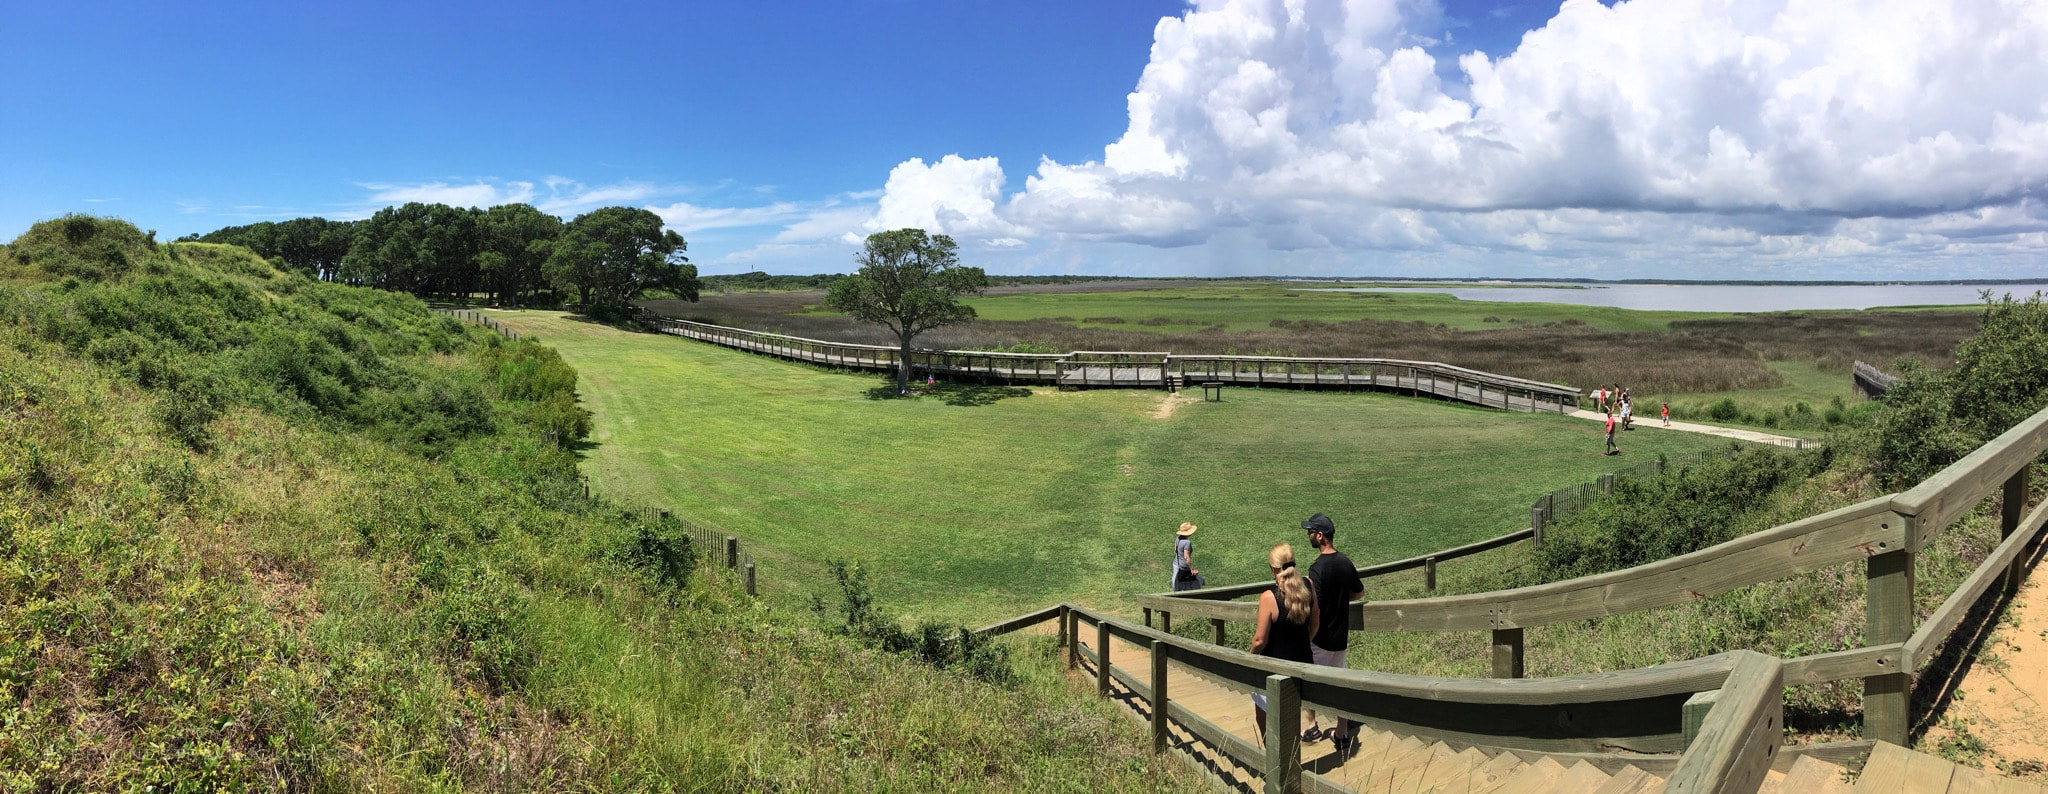 A panorama of the trails and mounds at Fort Fisher State Park in NC